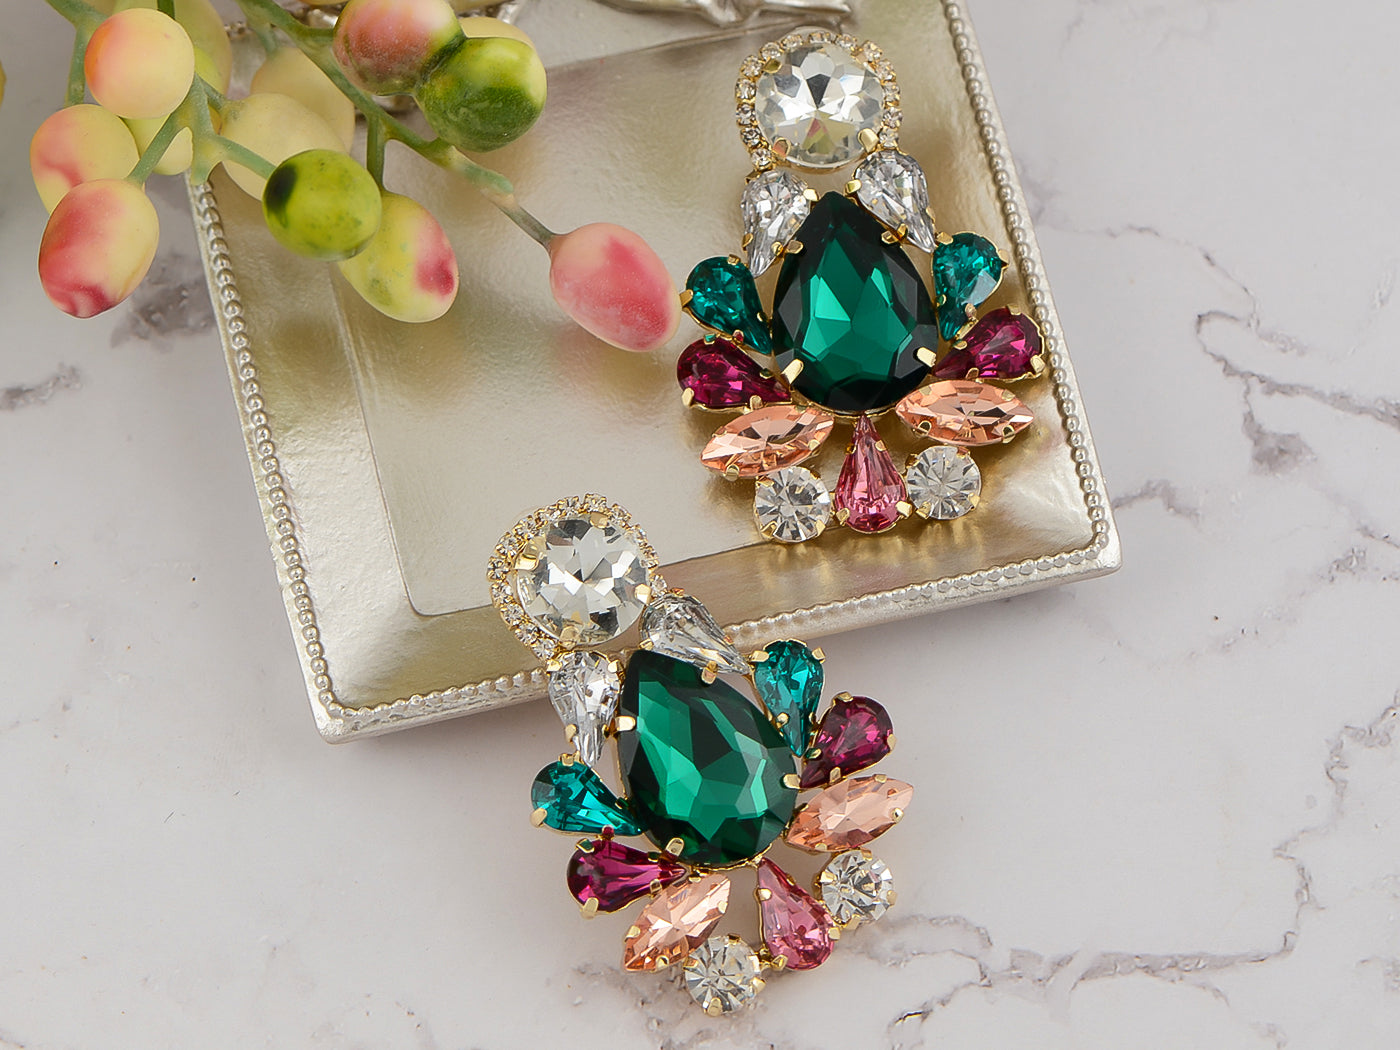 Alilang Antique Vintage Extra LARGE Multicolor Green Emerald Crystal Rhinestones Bridal Bridesmaid Wedding Prom Drop Dangle Earrings for Women Girls